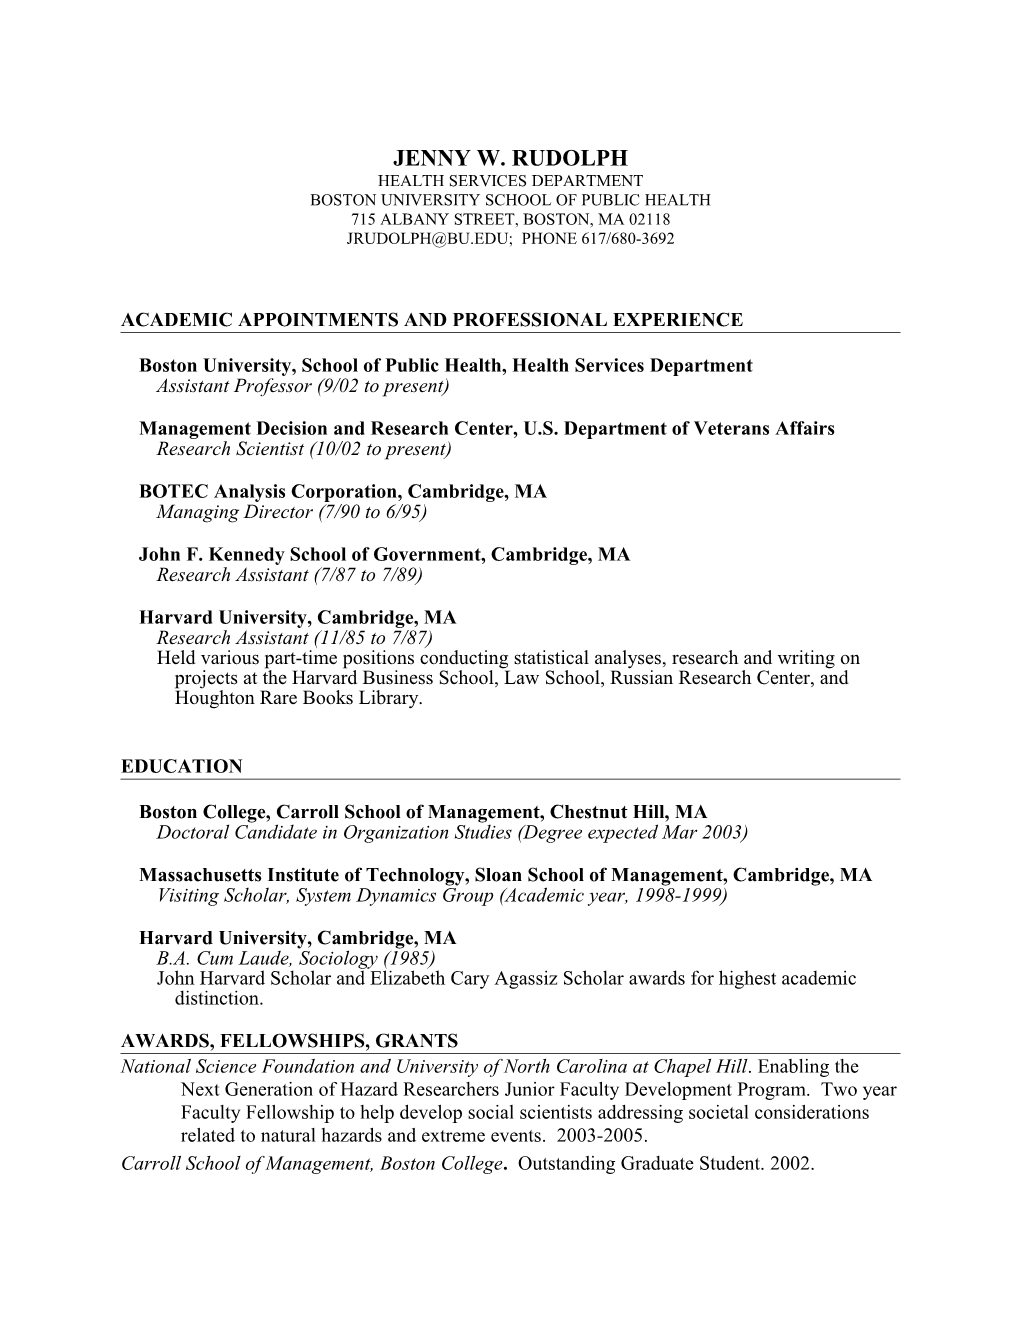 Academic Appointments and Professional Experience